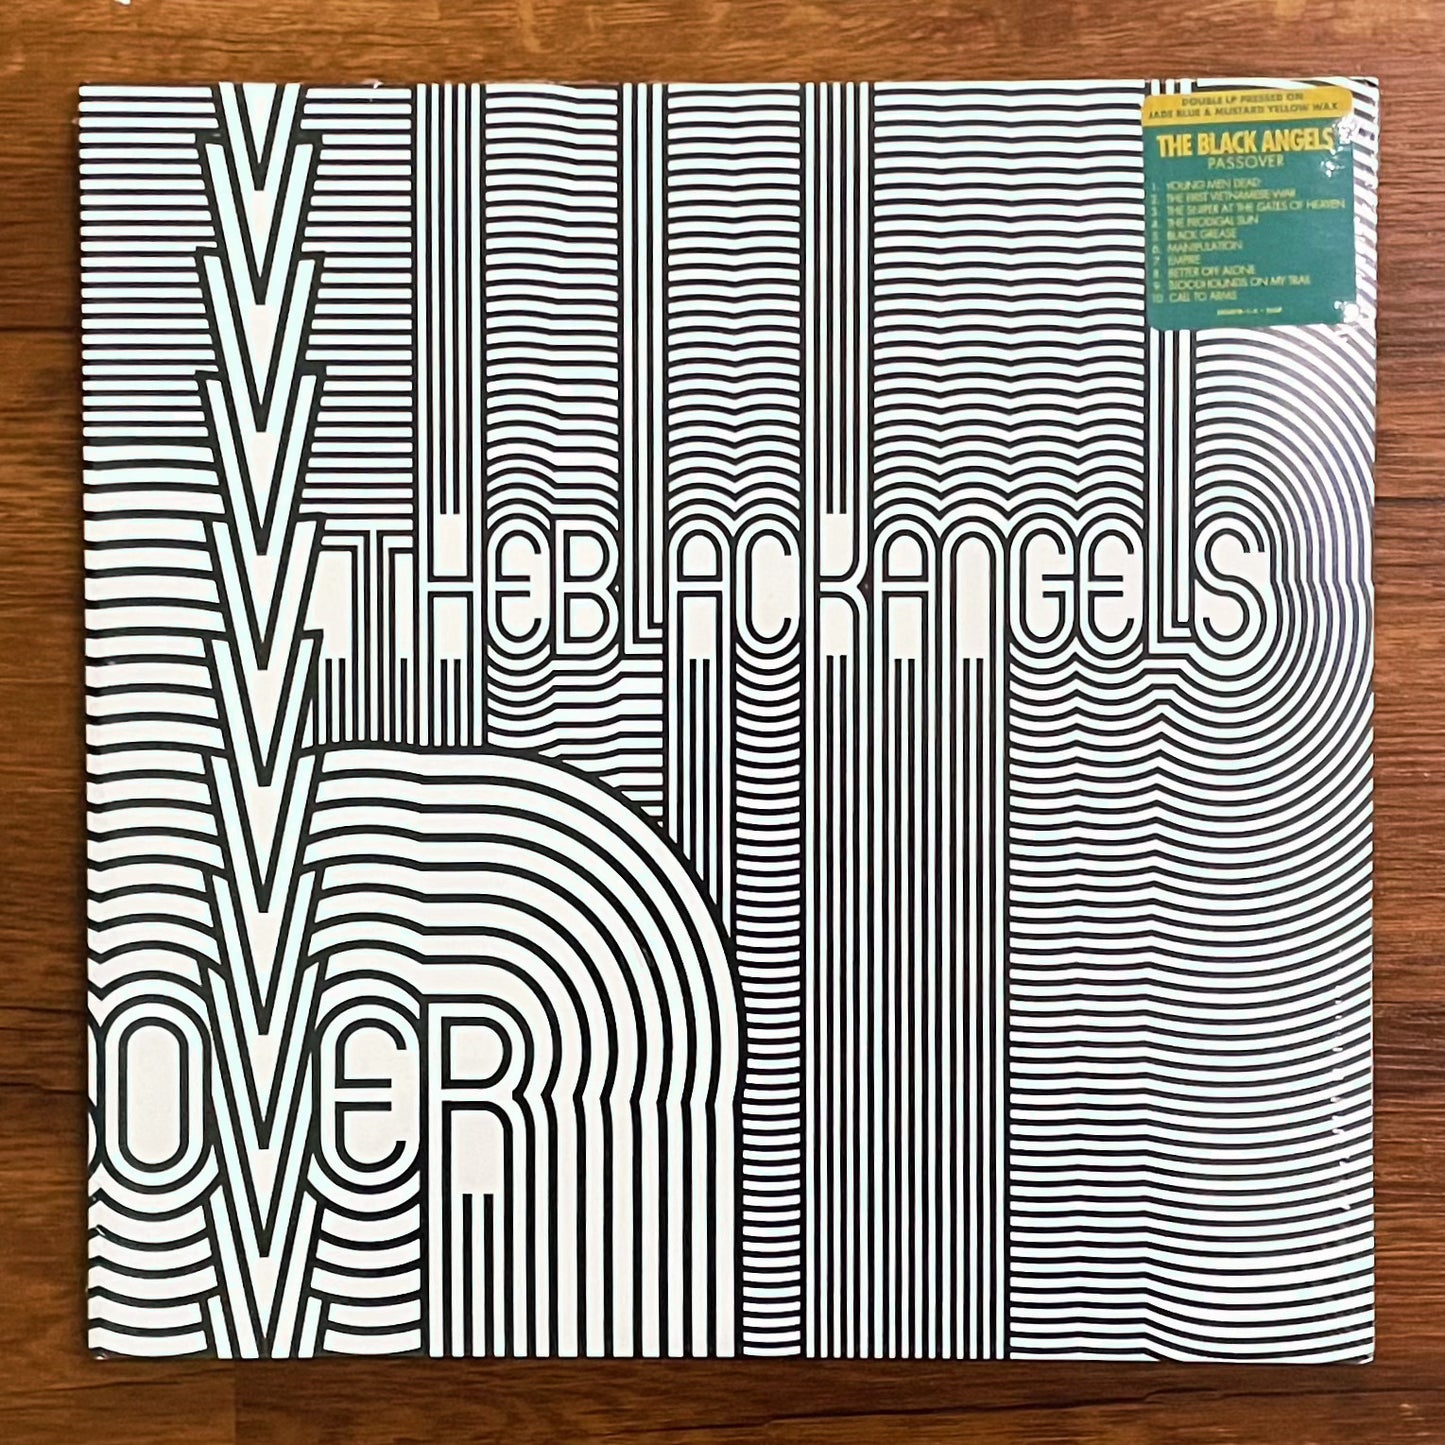 The Black Angels – Passover